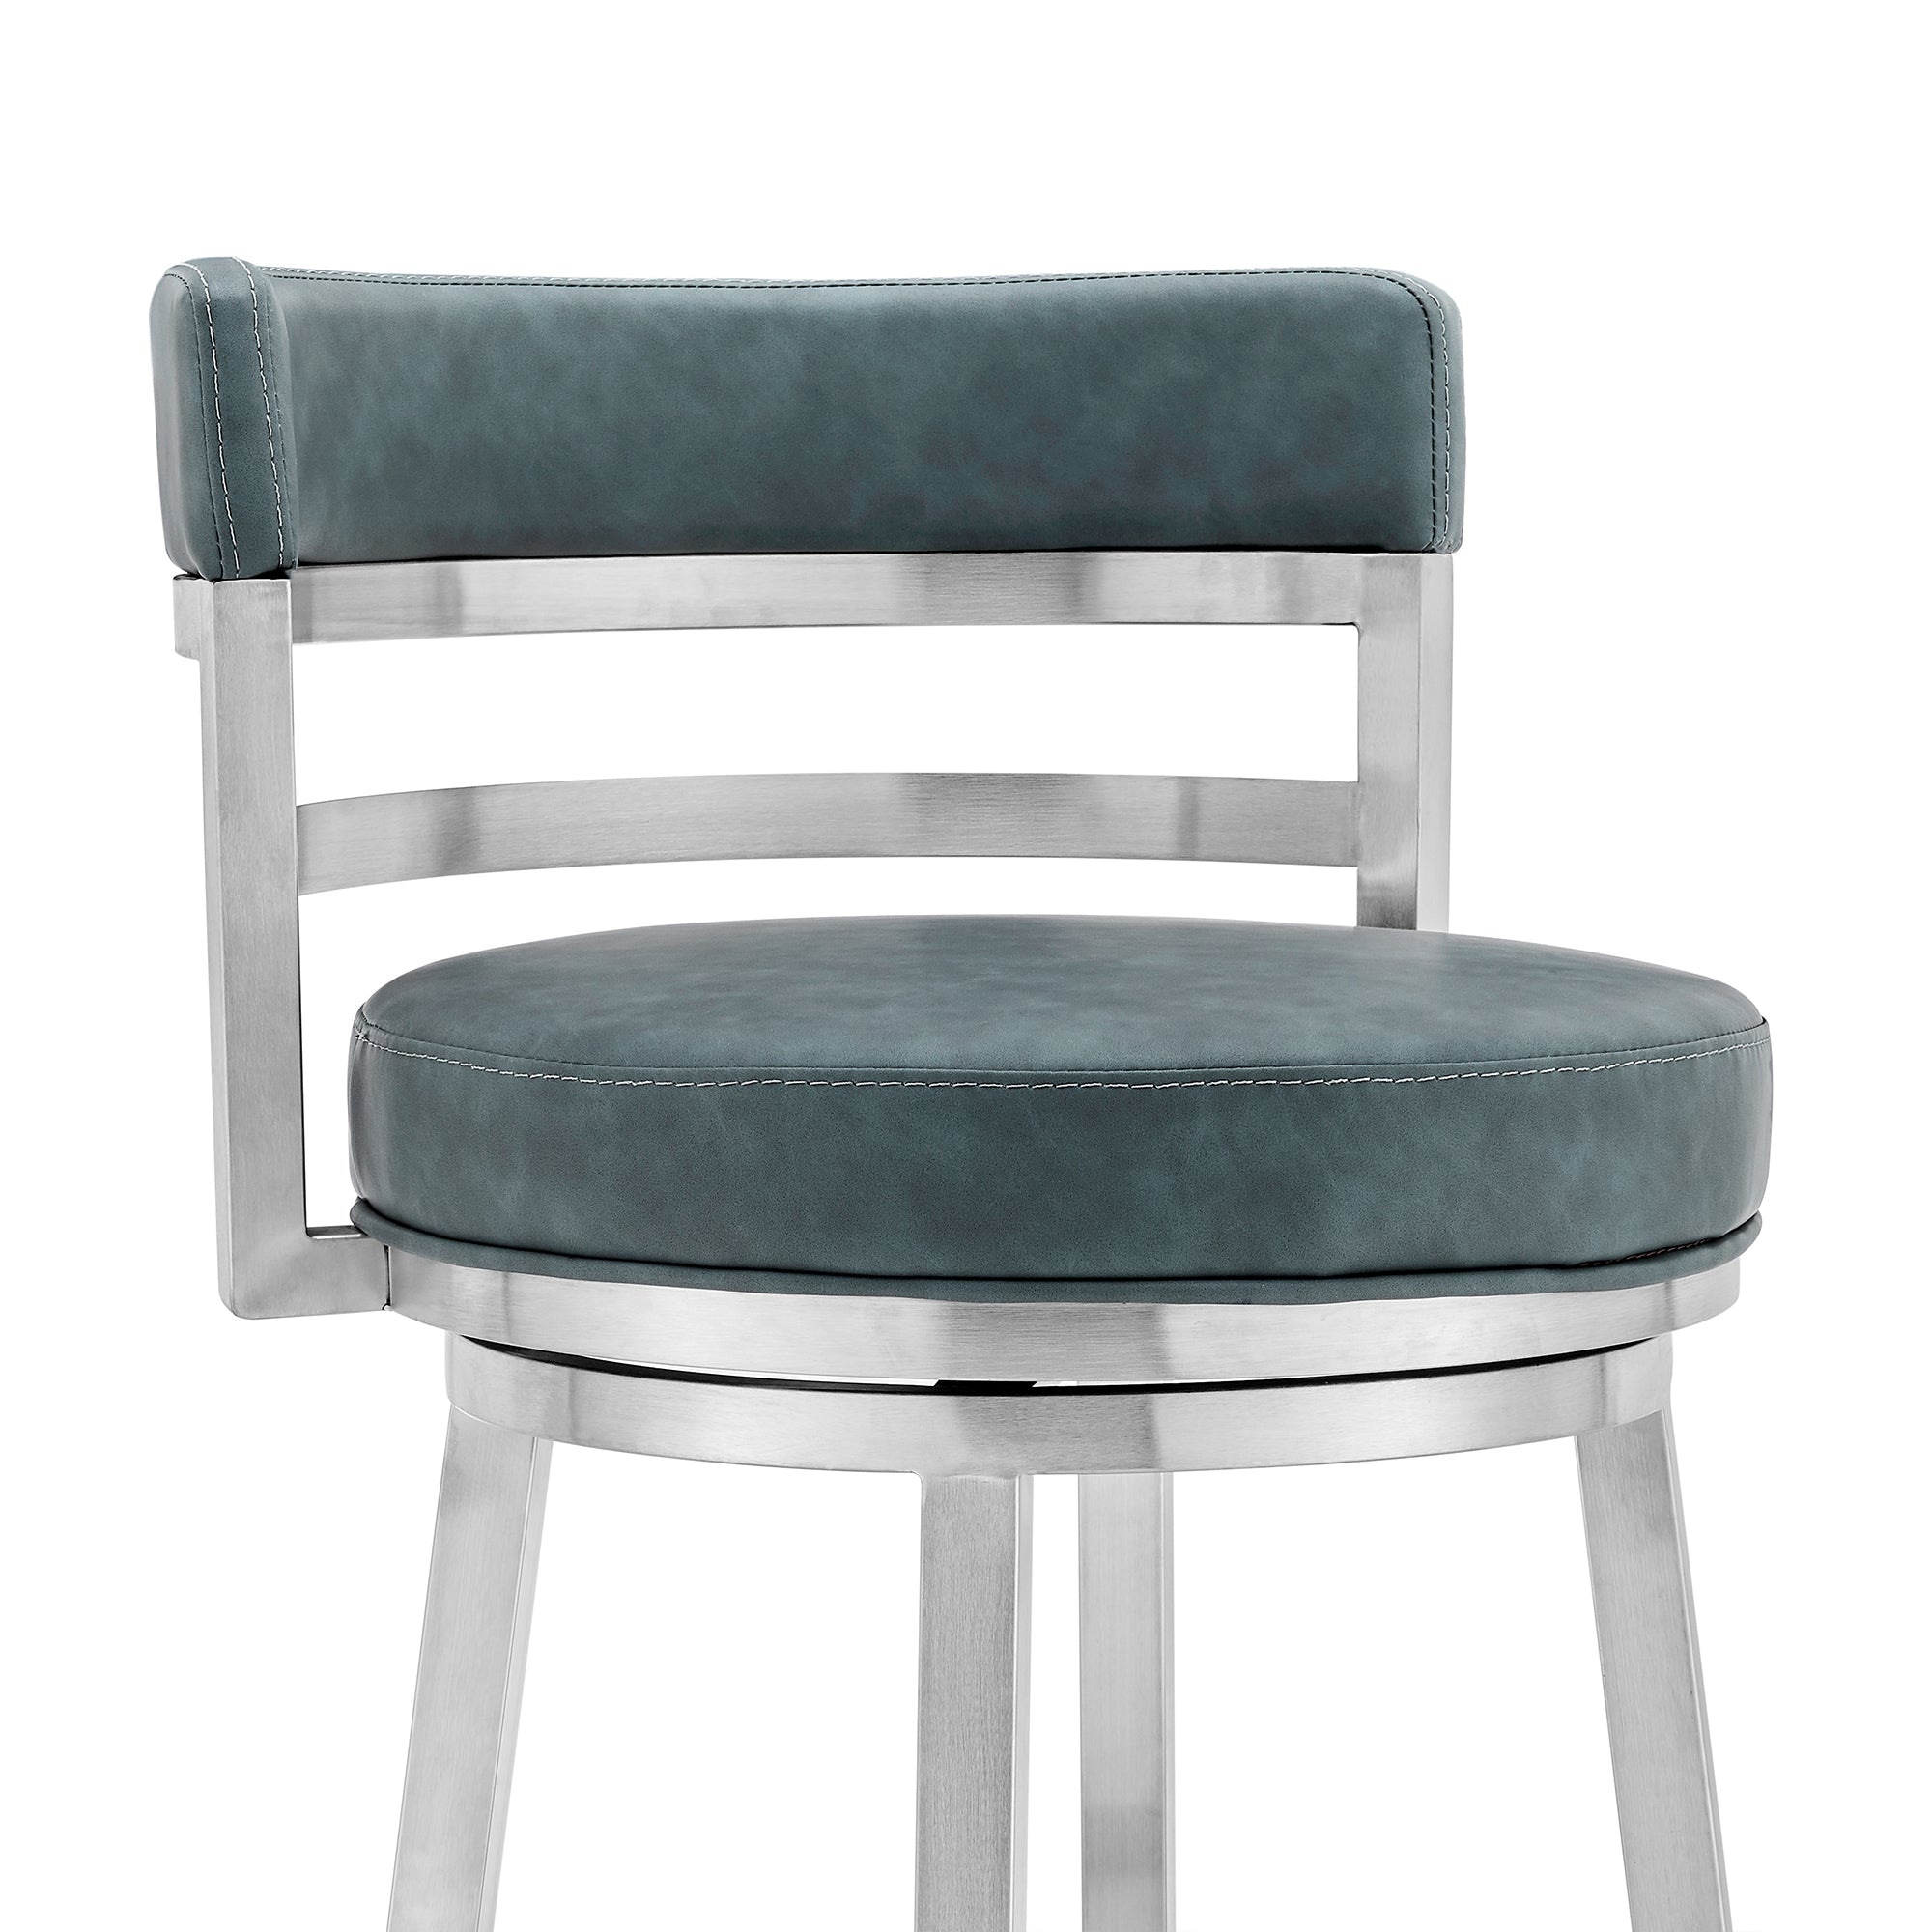 Armen Living - Titana Bar or Counter Stool in Blue Faux Leather and Metal - 840254335196